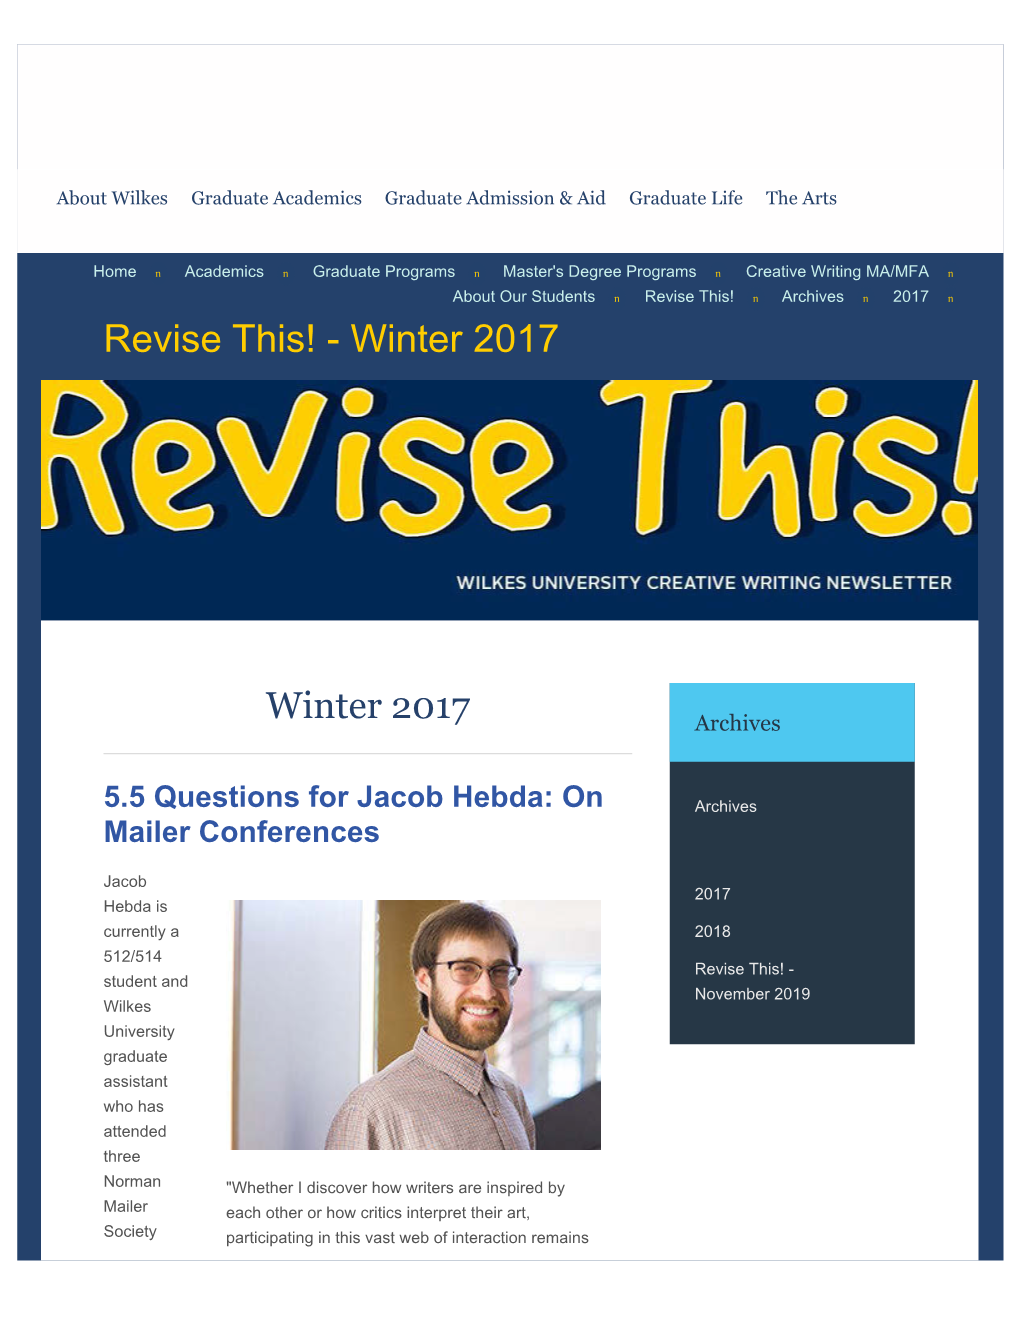 Revise This! N Archives N 2017 N Revise This! - Winter 2017